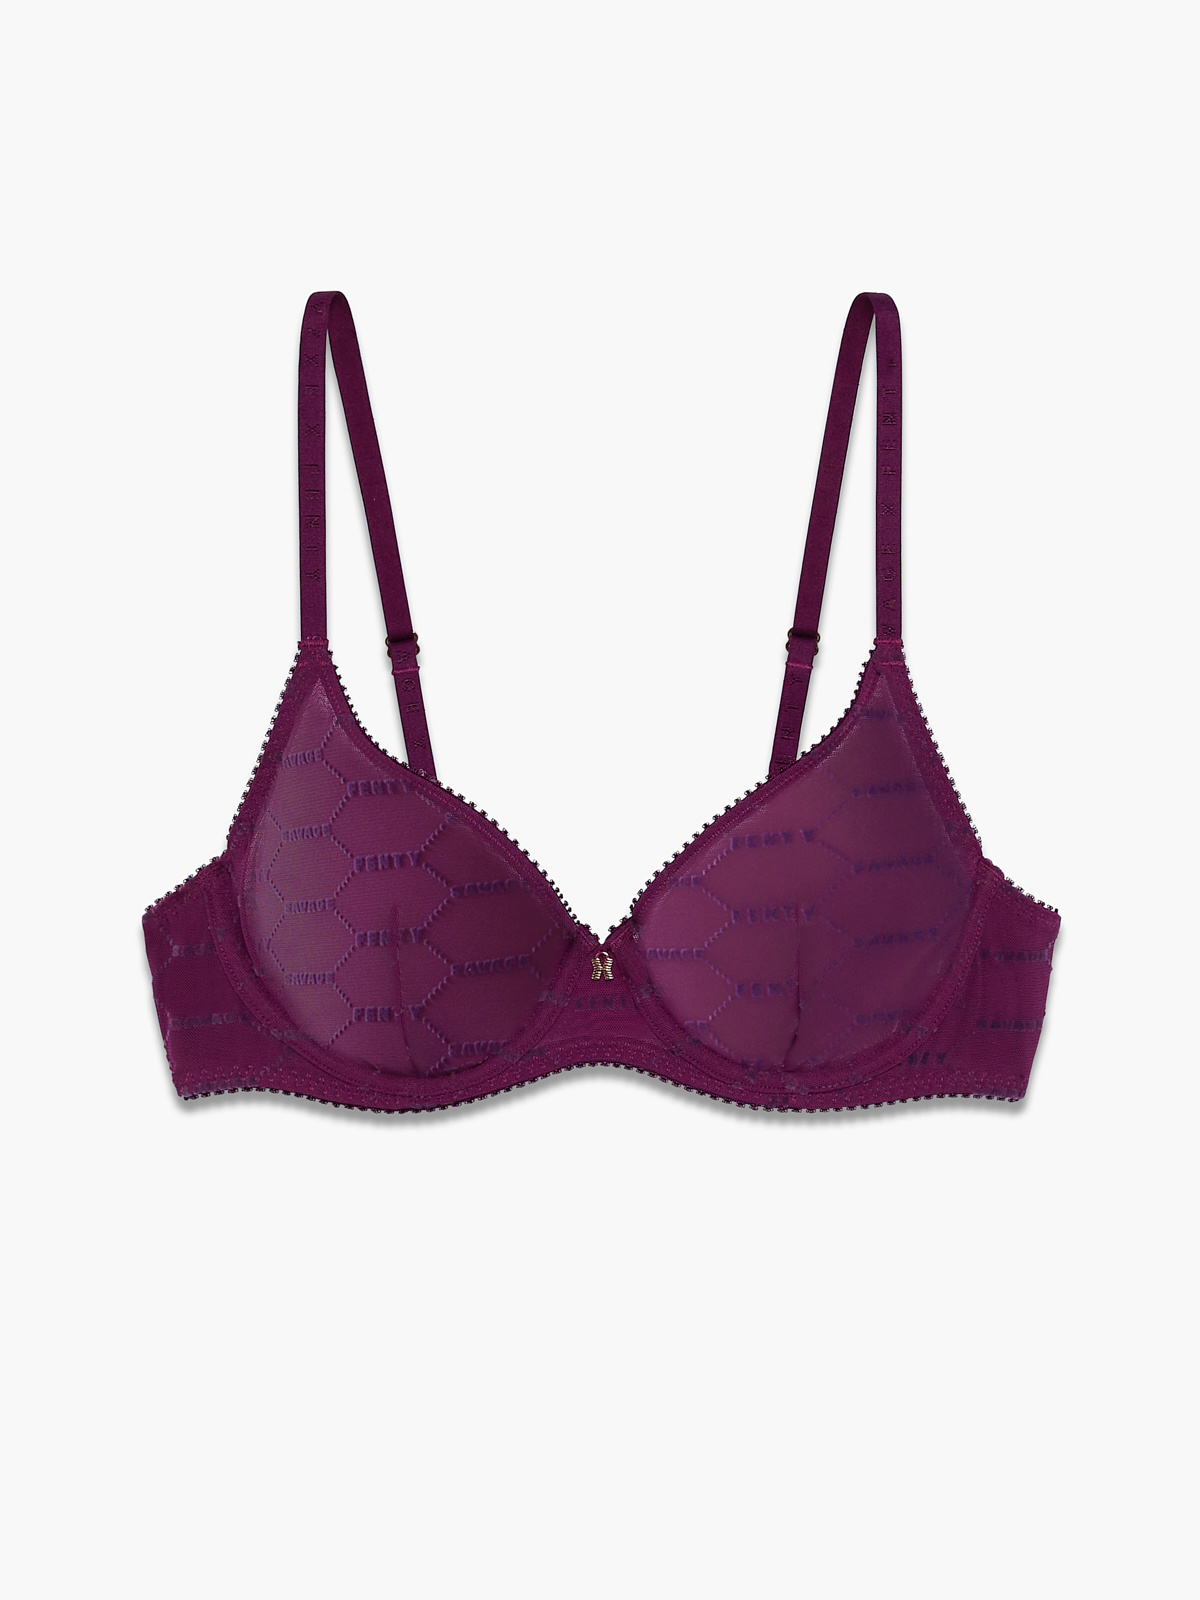 barely there, Intimates & Sleepwear, Barely There Purple Mesh Underwire Bra  36b